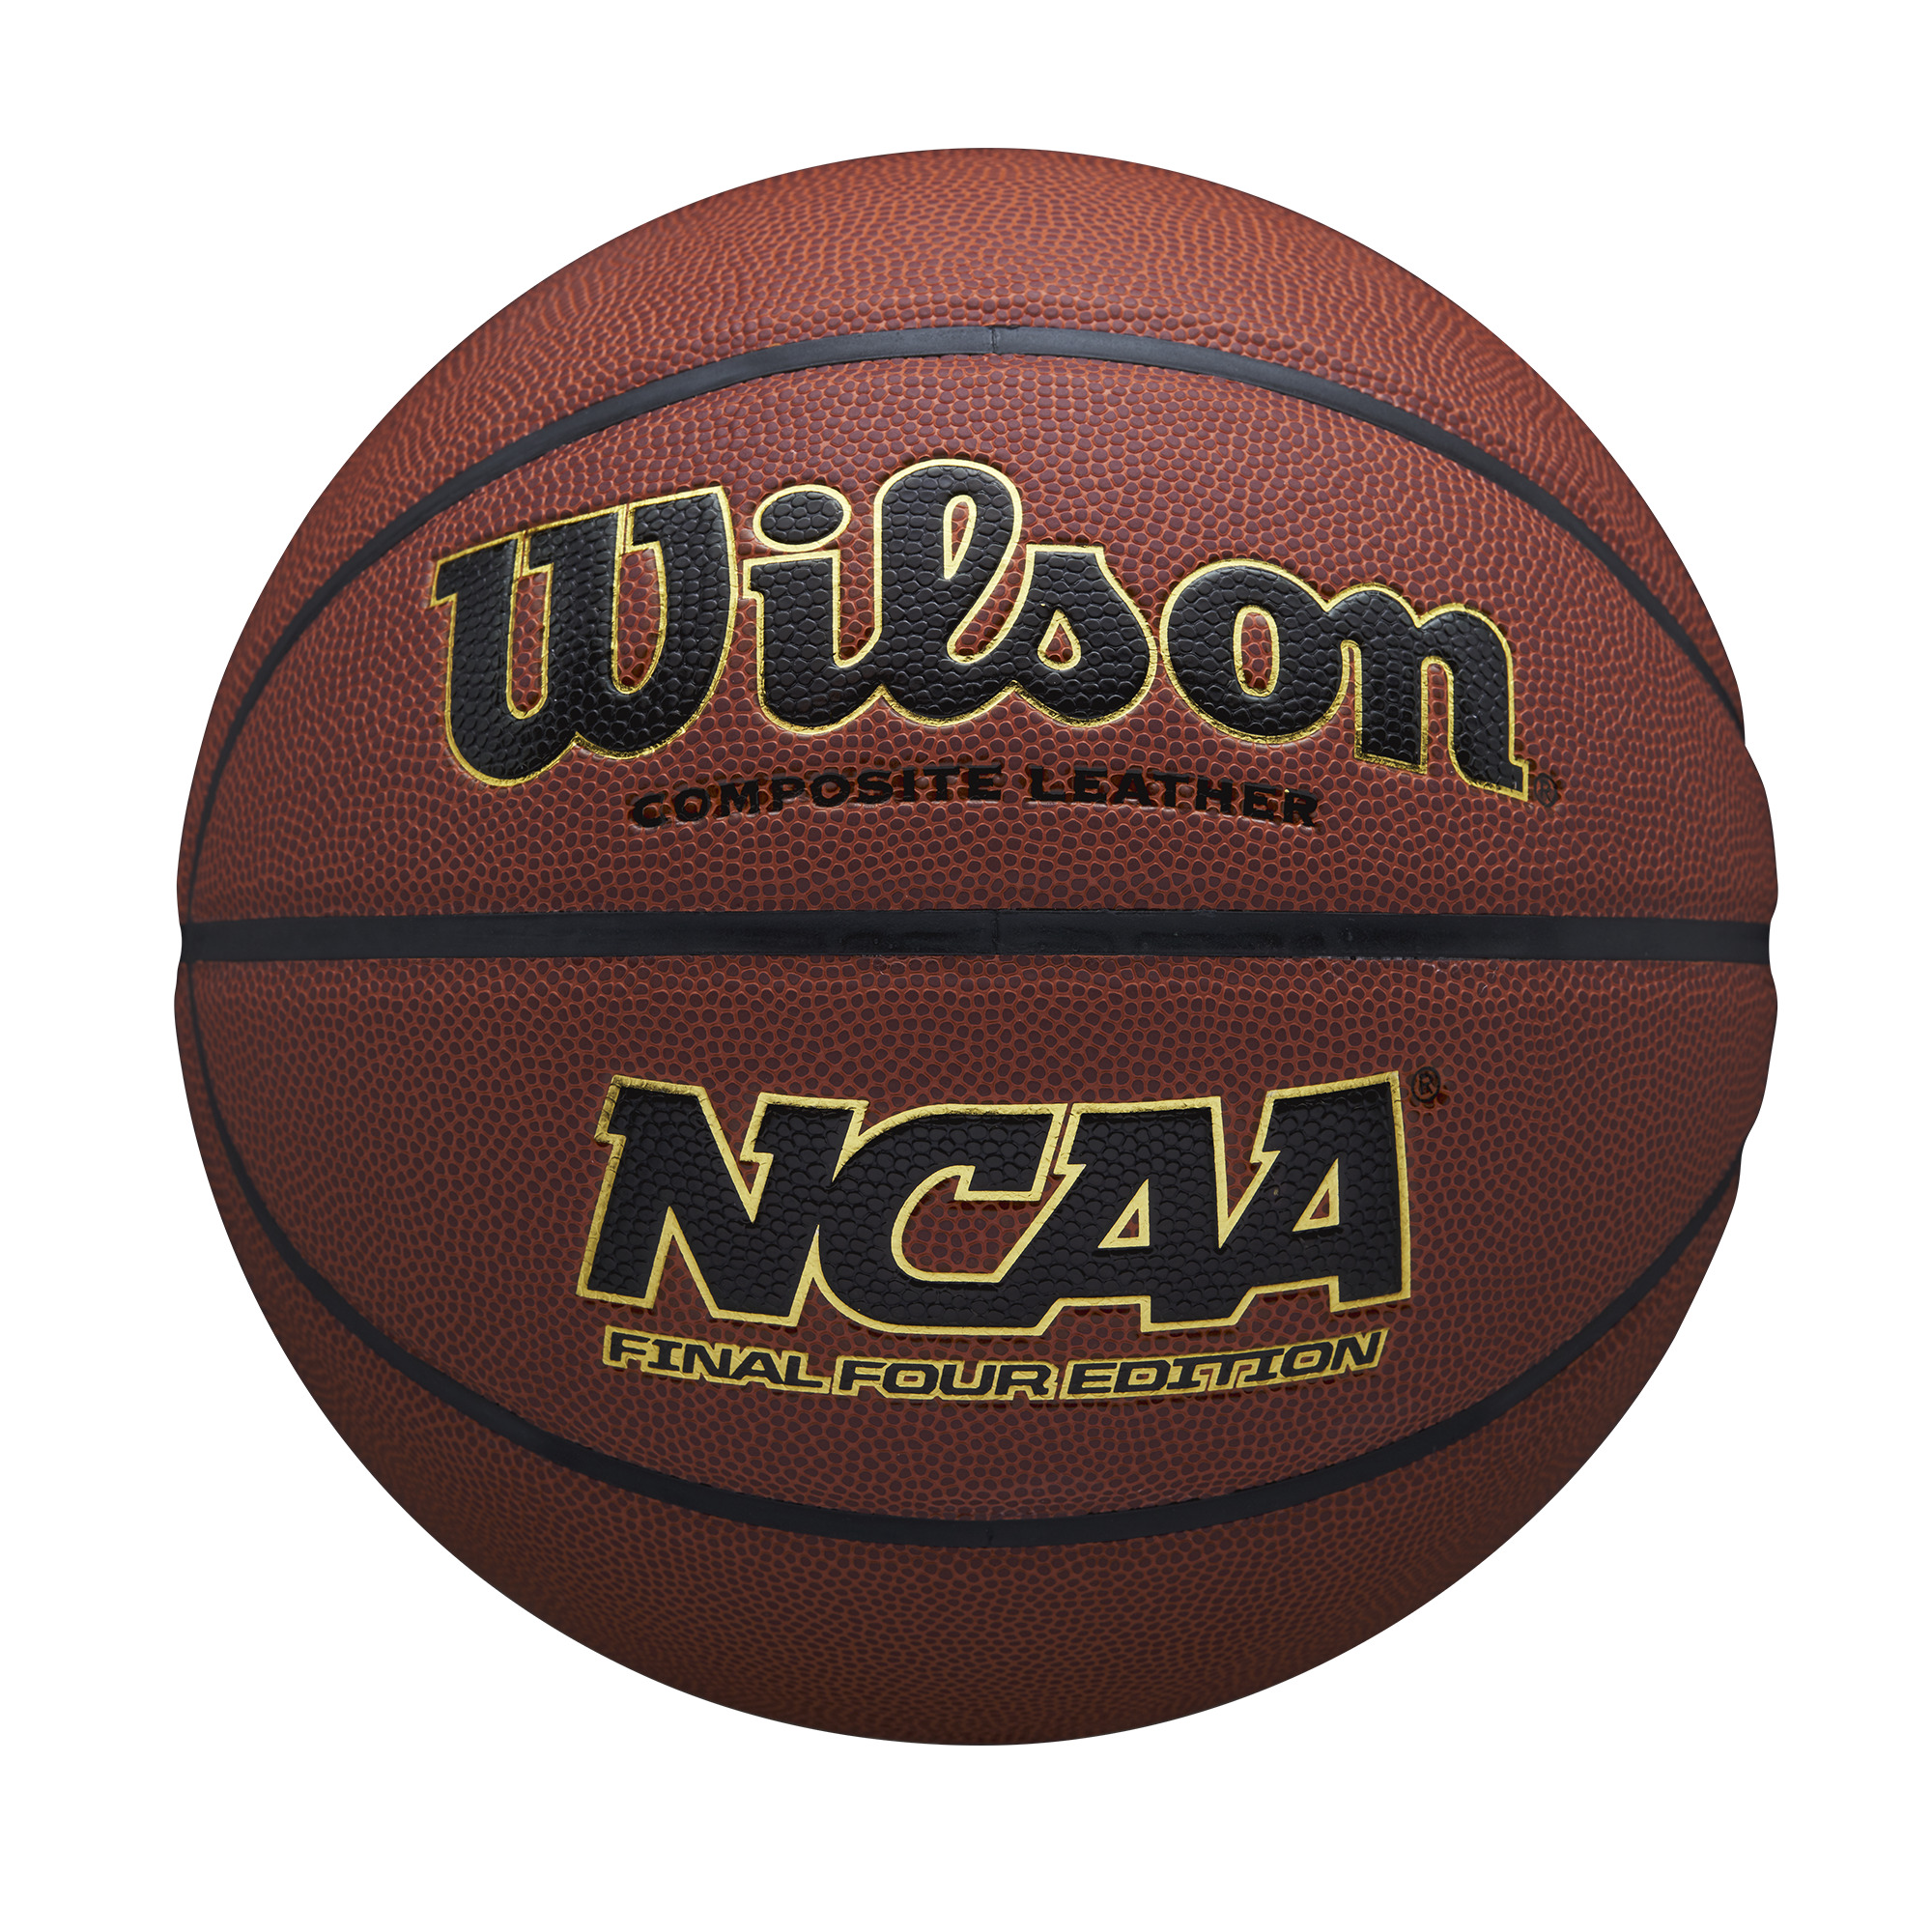 Wilson NCAA Final Four Edition Basketball, Official Size - 29.5" - image 1 of 7